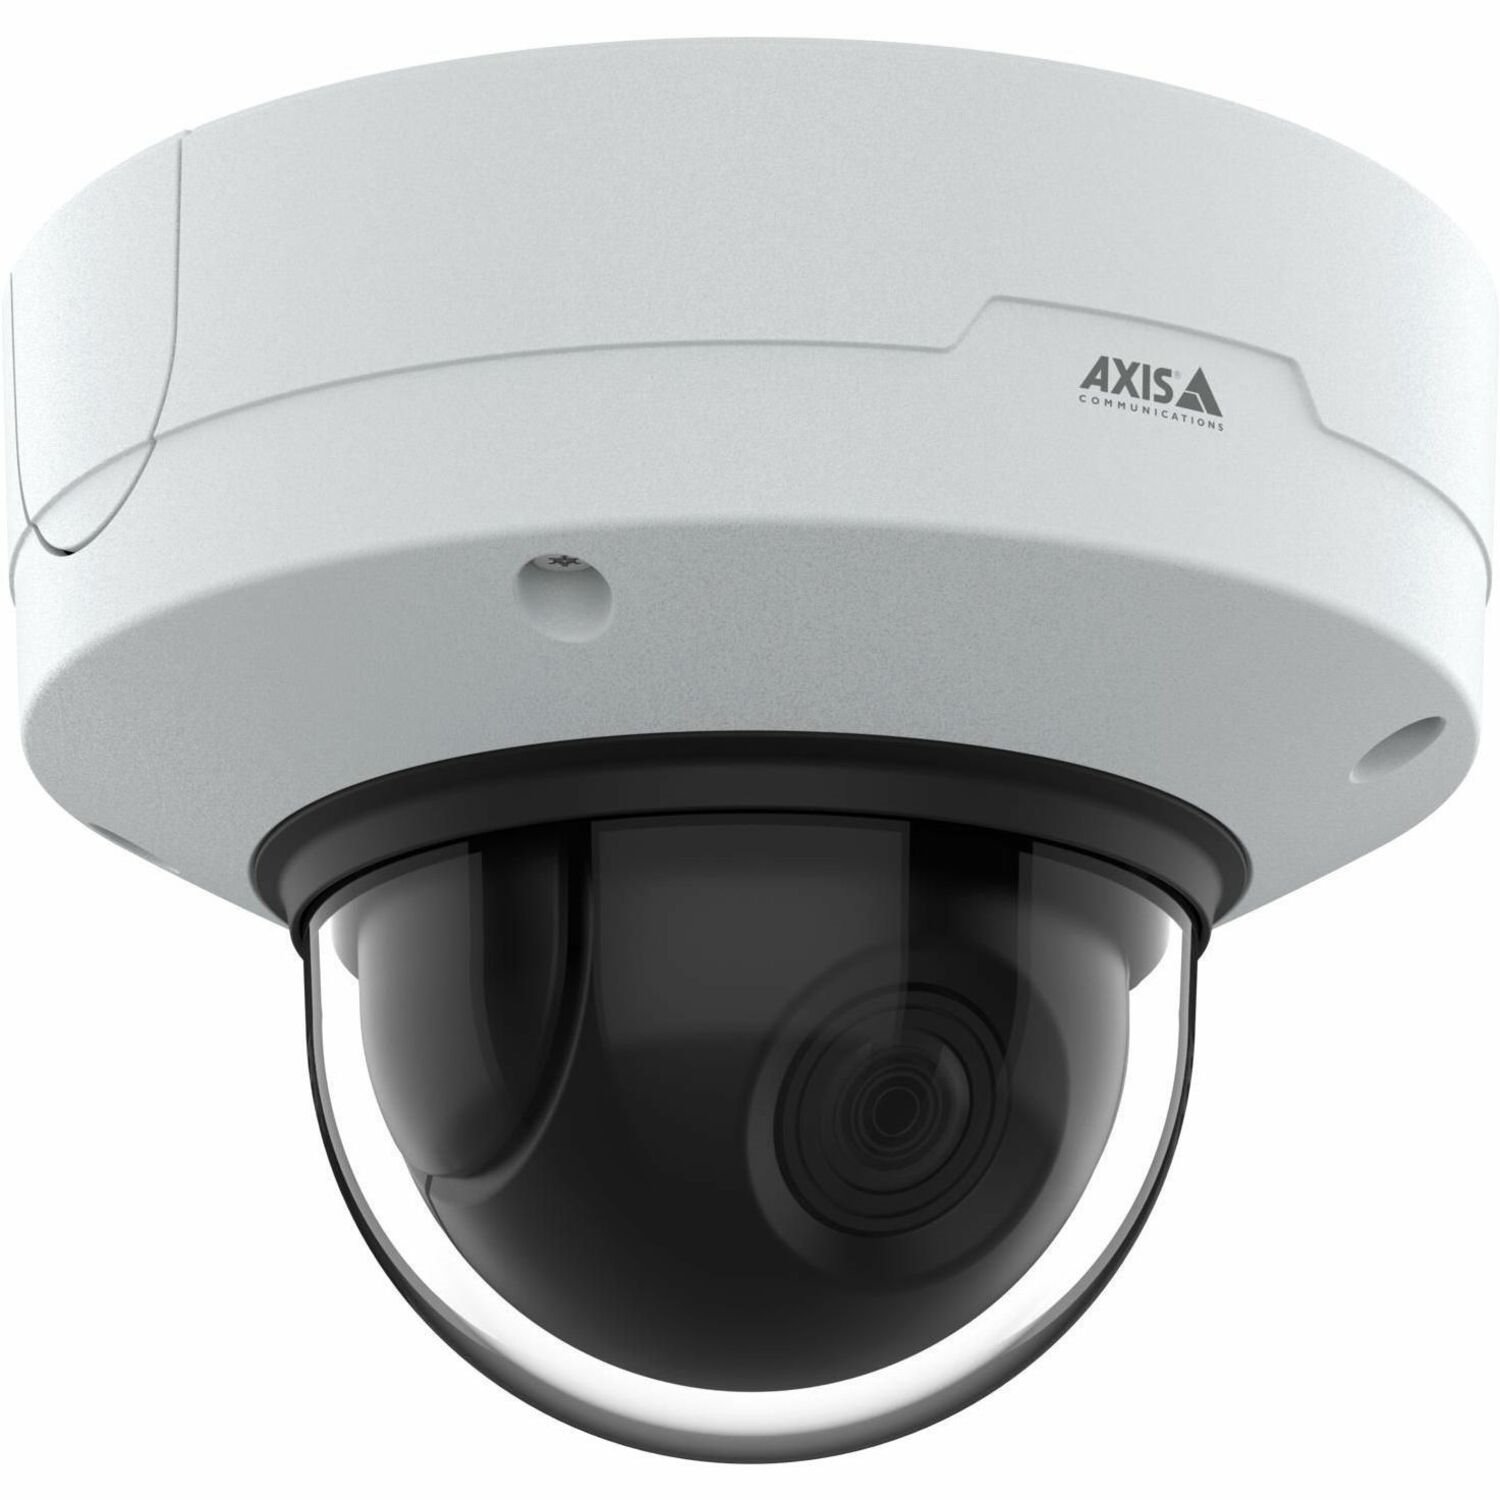 AXIS Q3628-VE 8 Megapixel Outdoor 4K Network Camera - Colour - Dome - White